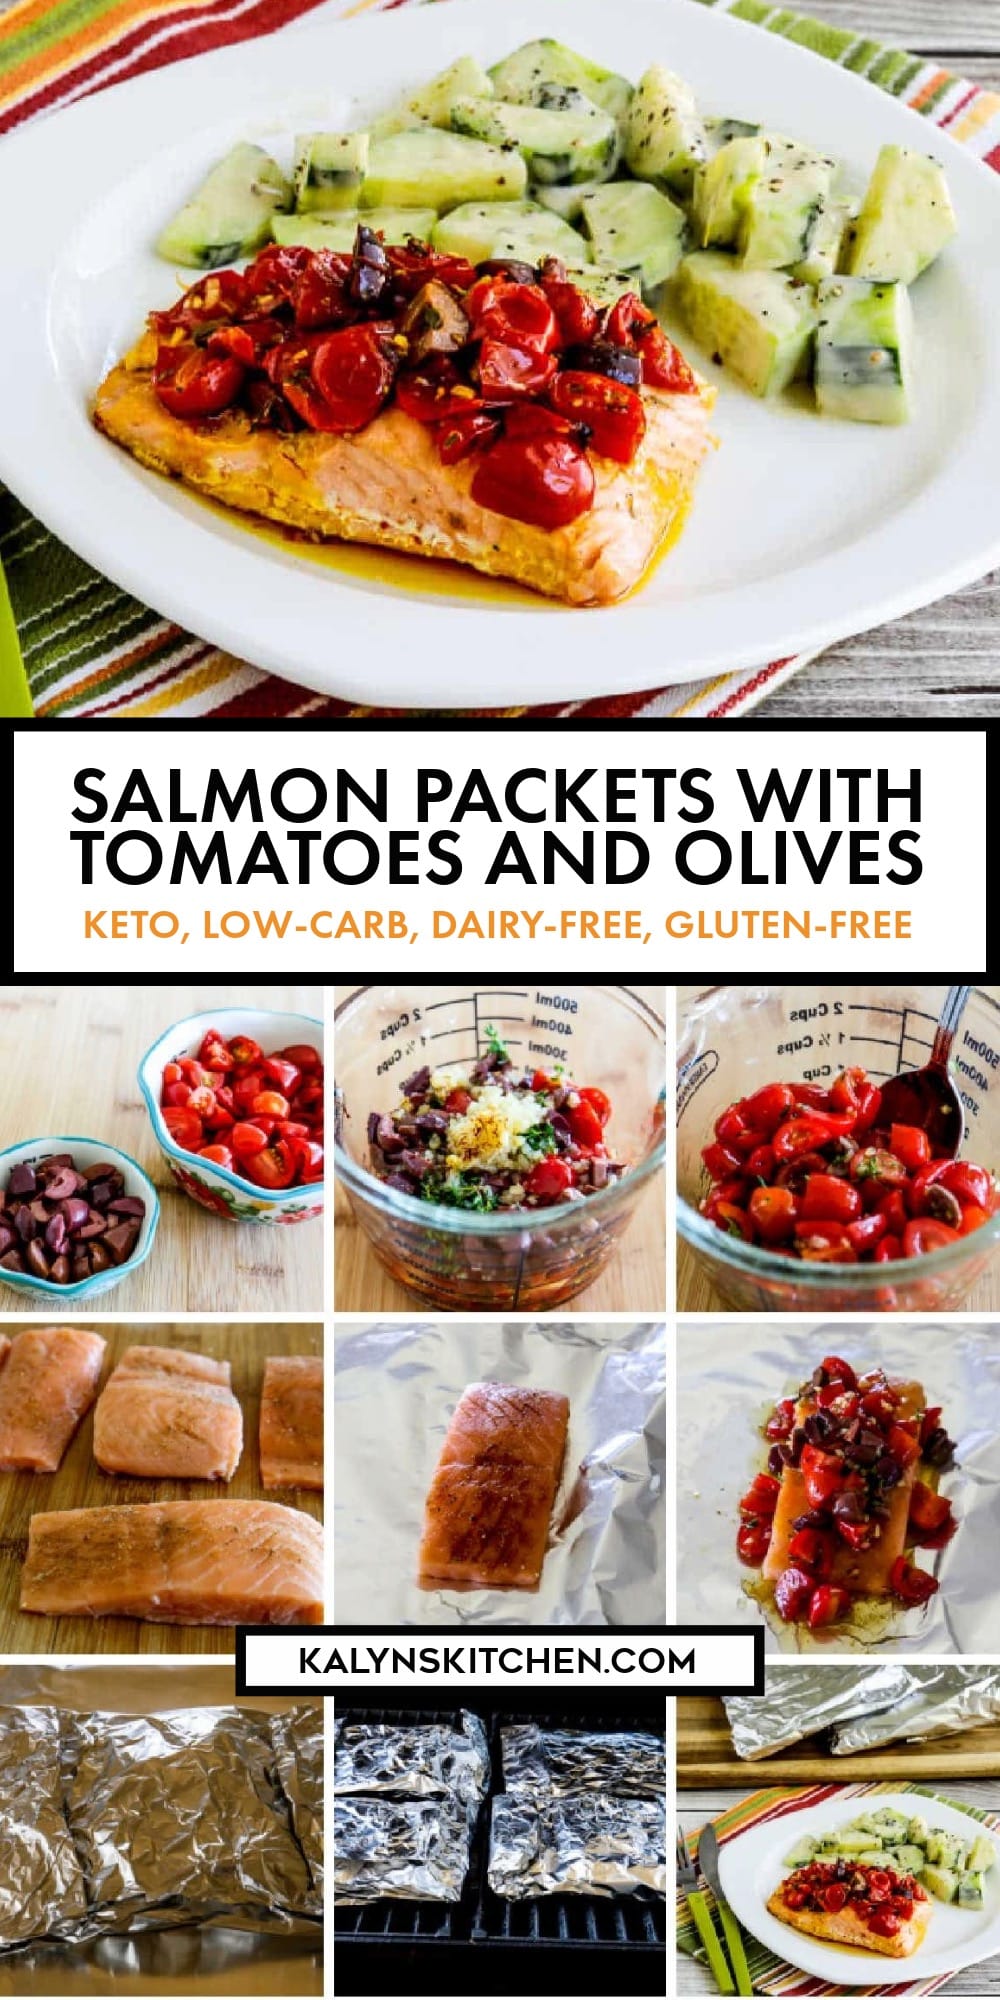 Pinterest image of Salmon Packets with Tomatoes and Olives